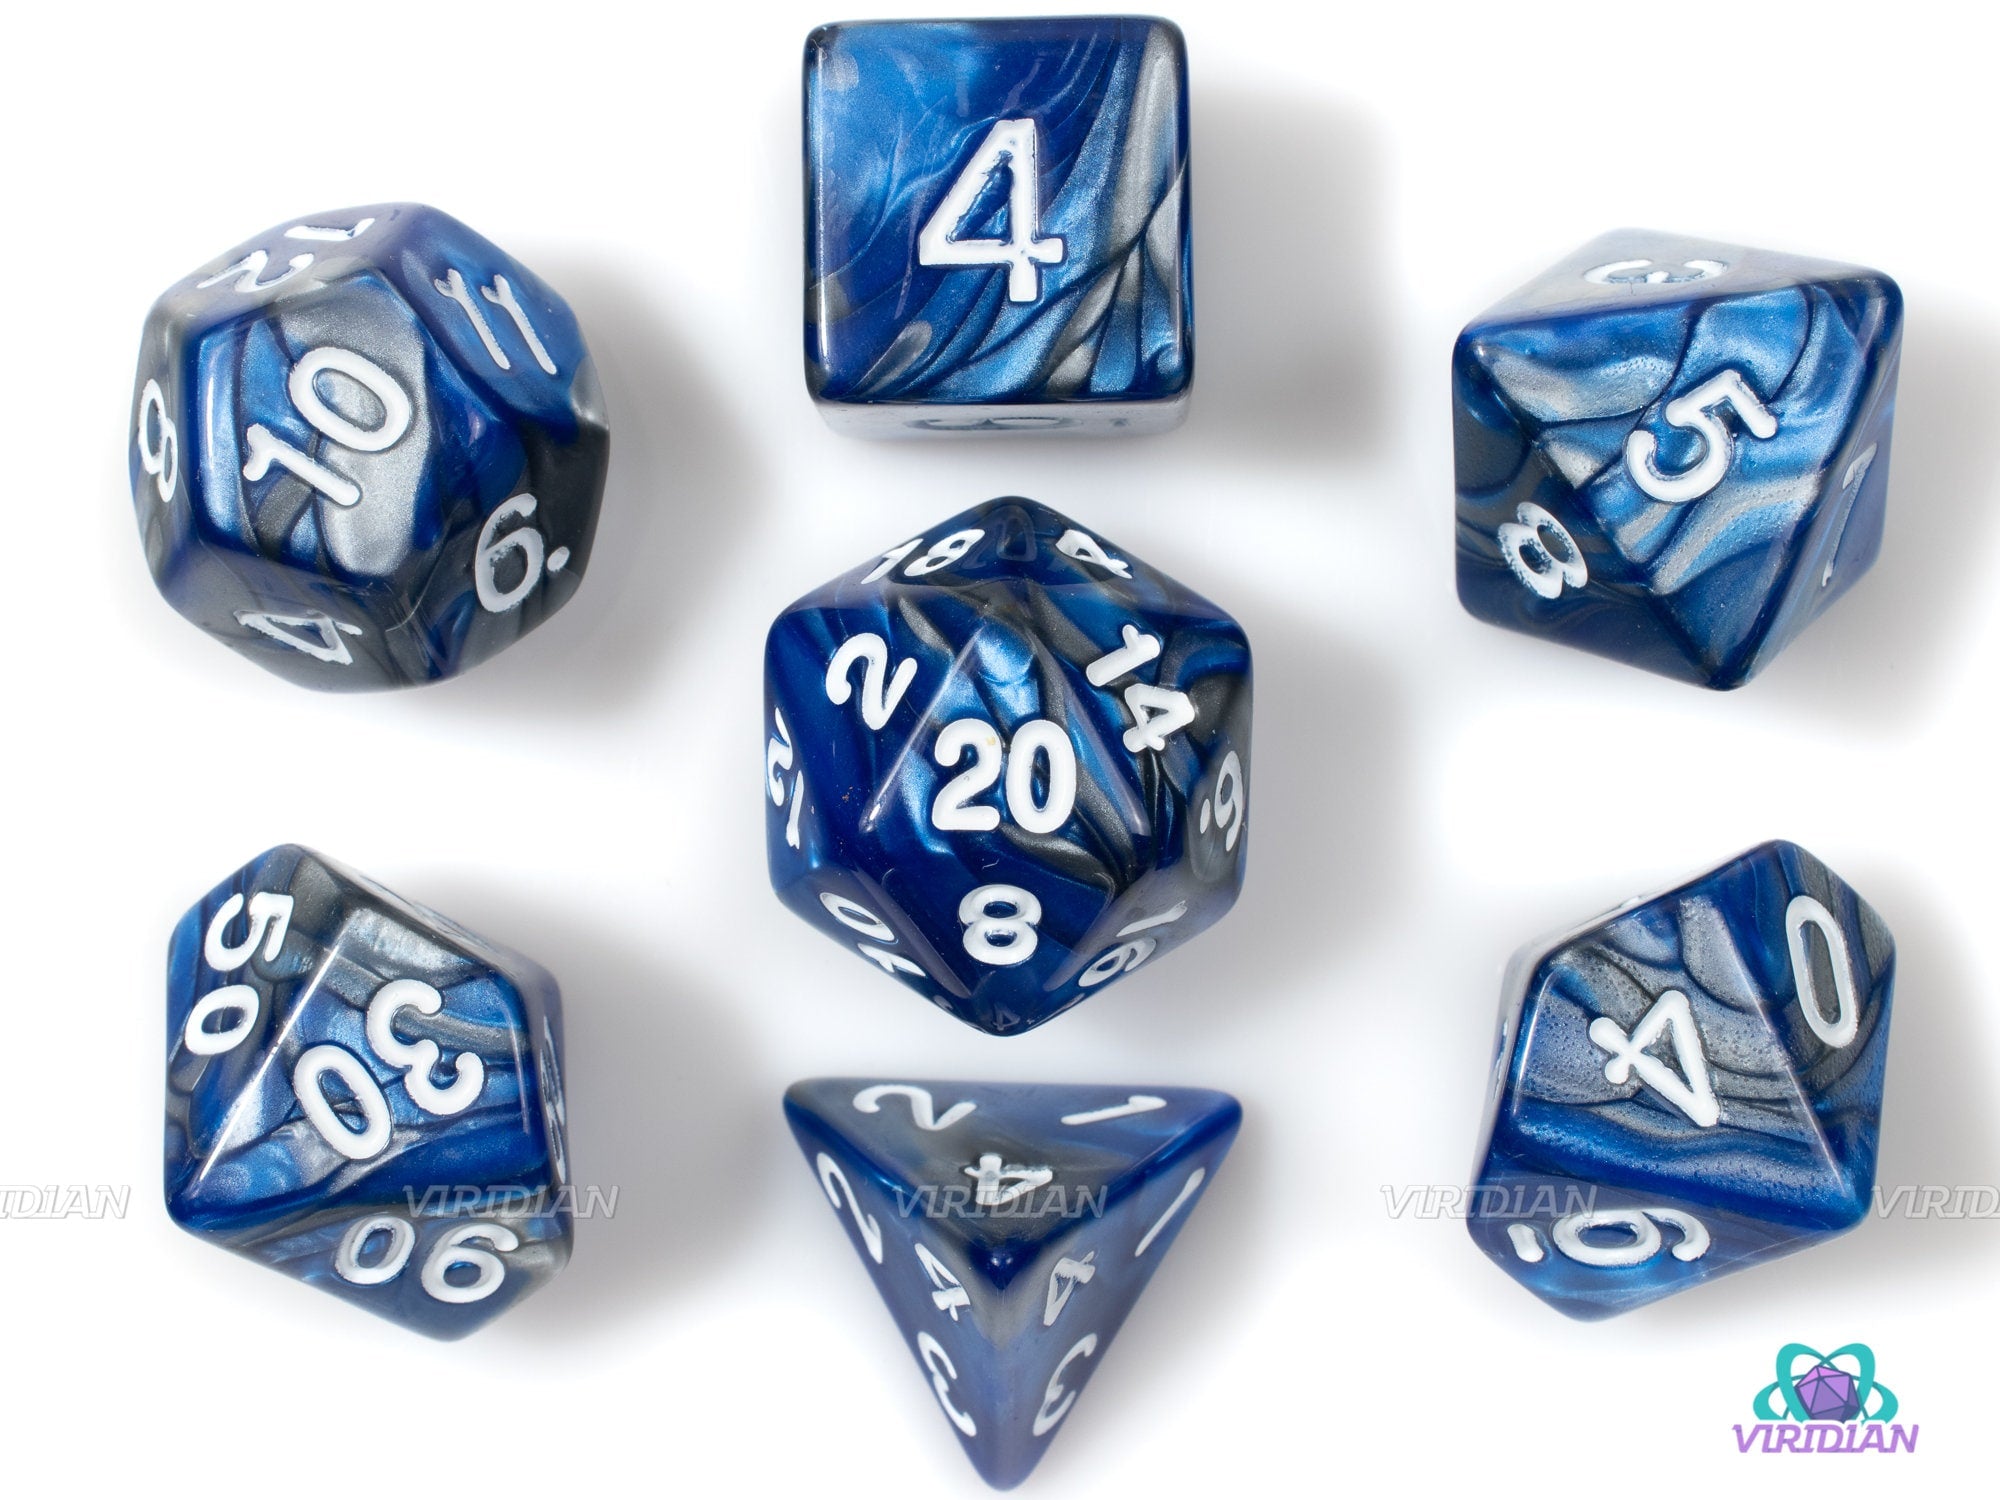 Bluesteel | Blue and Gray Swirled Acrylic Dice Set (7) | Dungeons and Dragons (DnD)